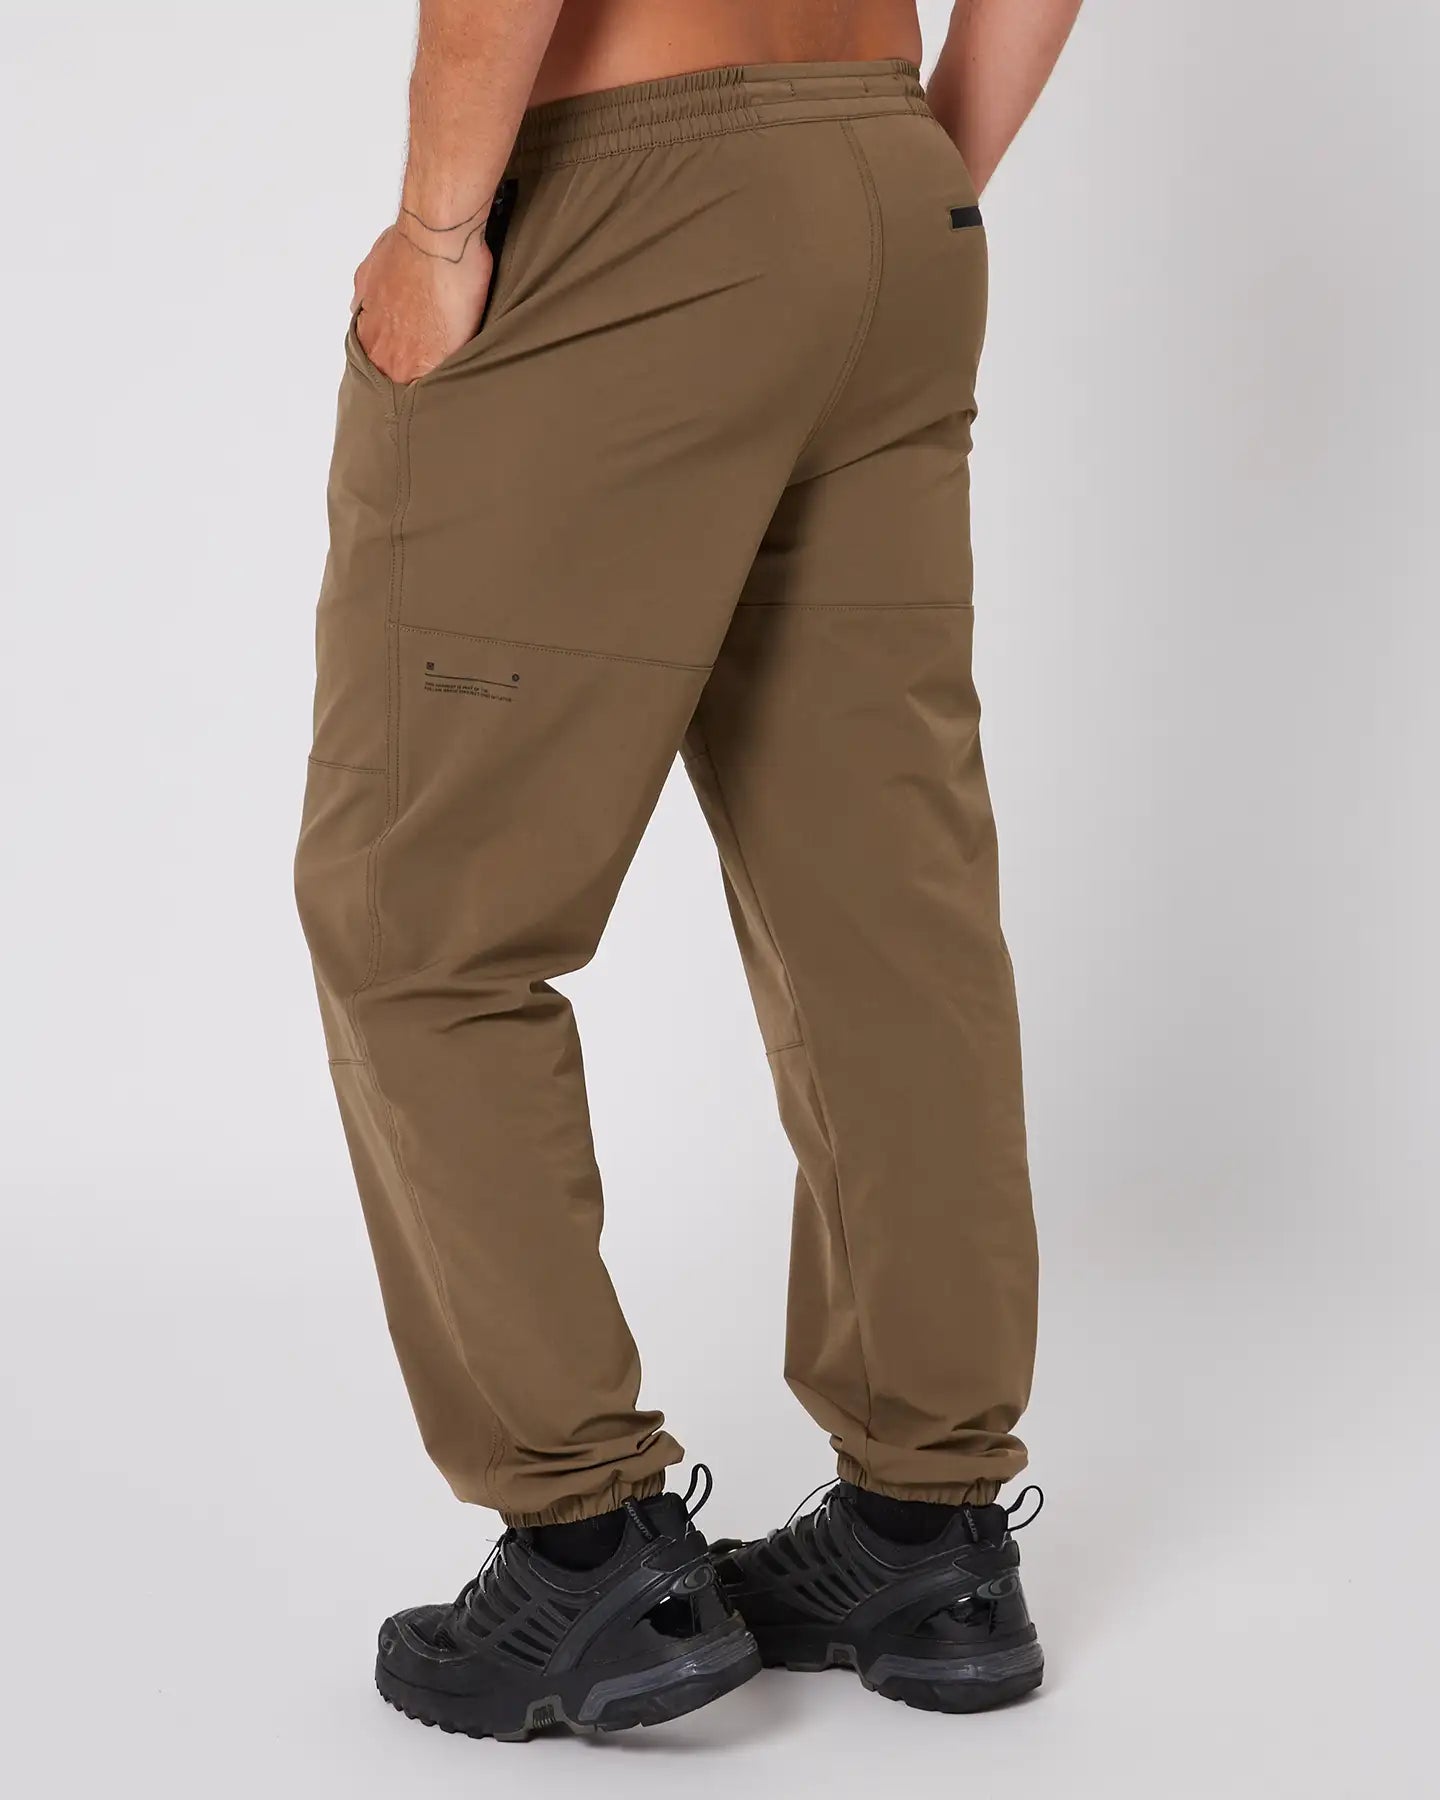 Follow All Day Pants - Deep Taupe 4